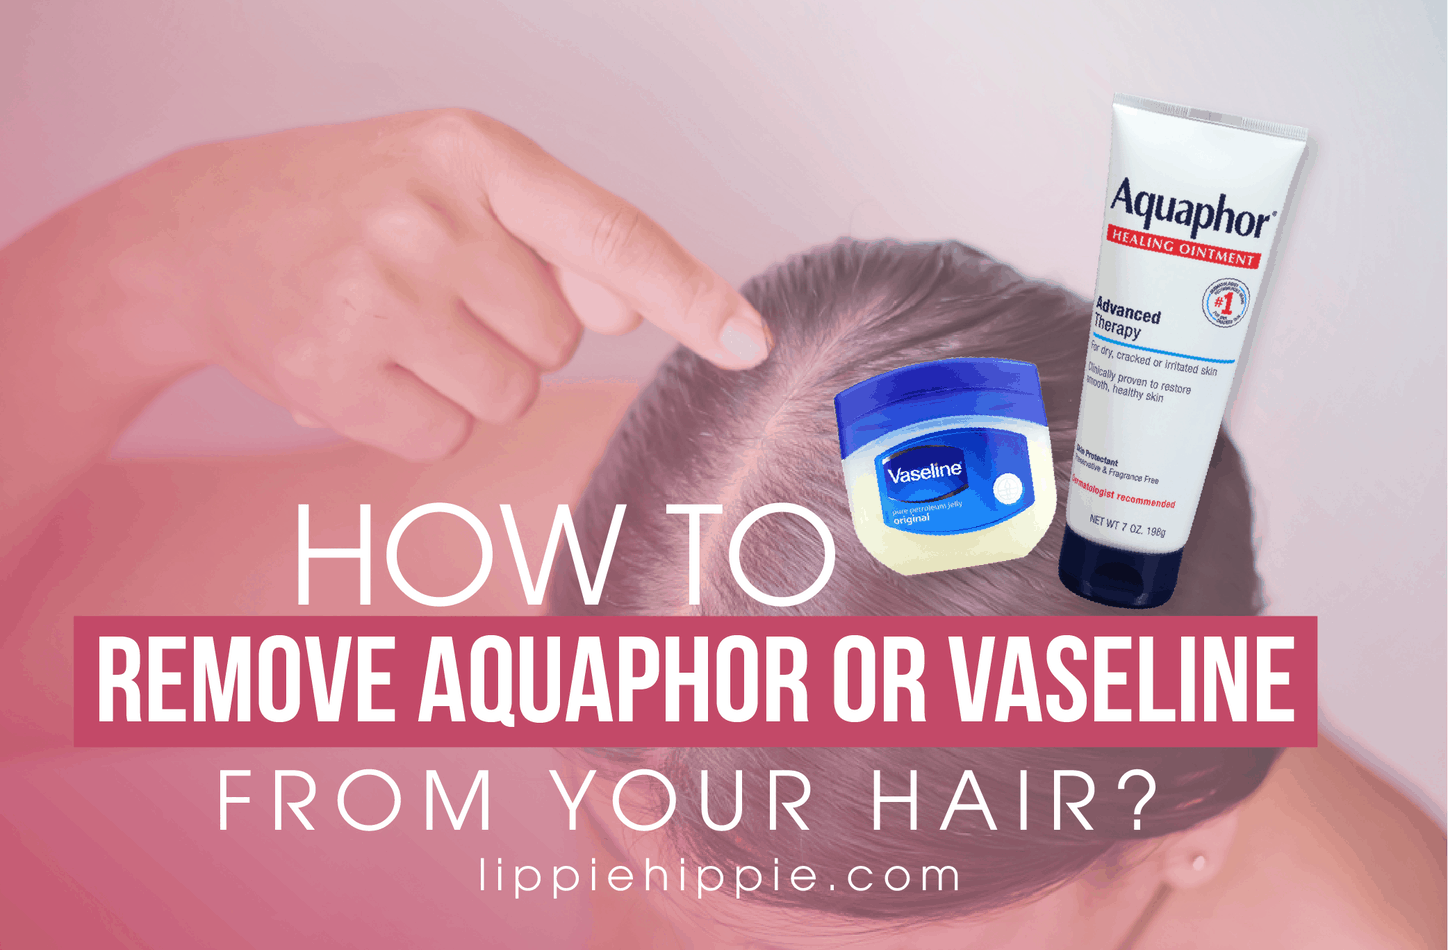 Best Way To Remove Aquaphor Or Vaseline From Your Hair